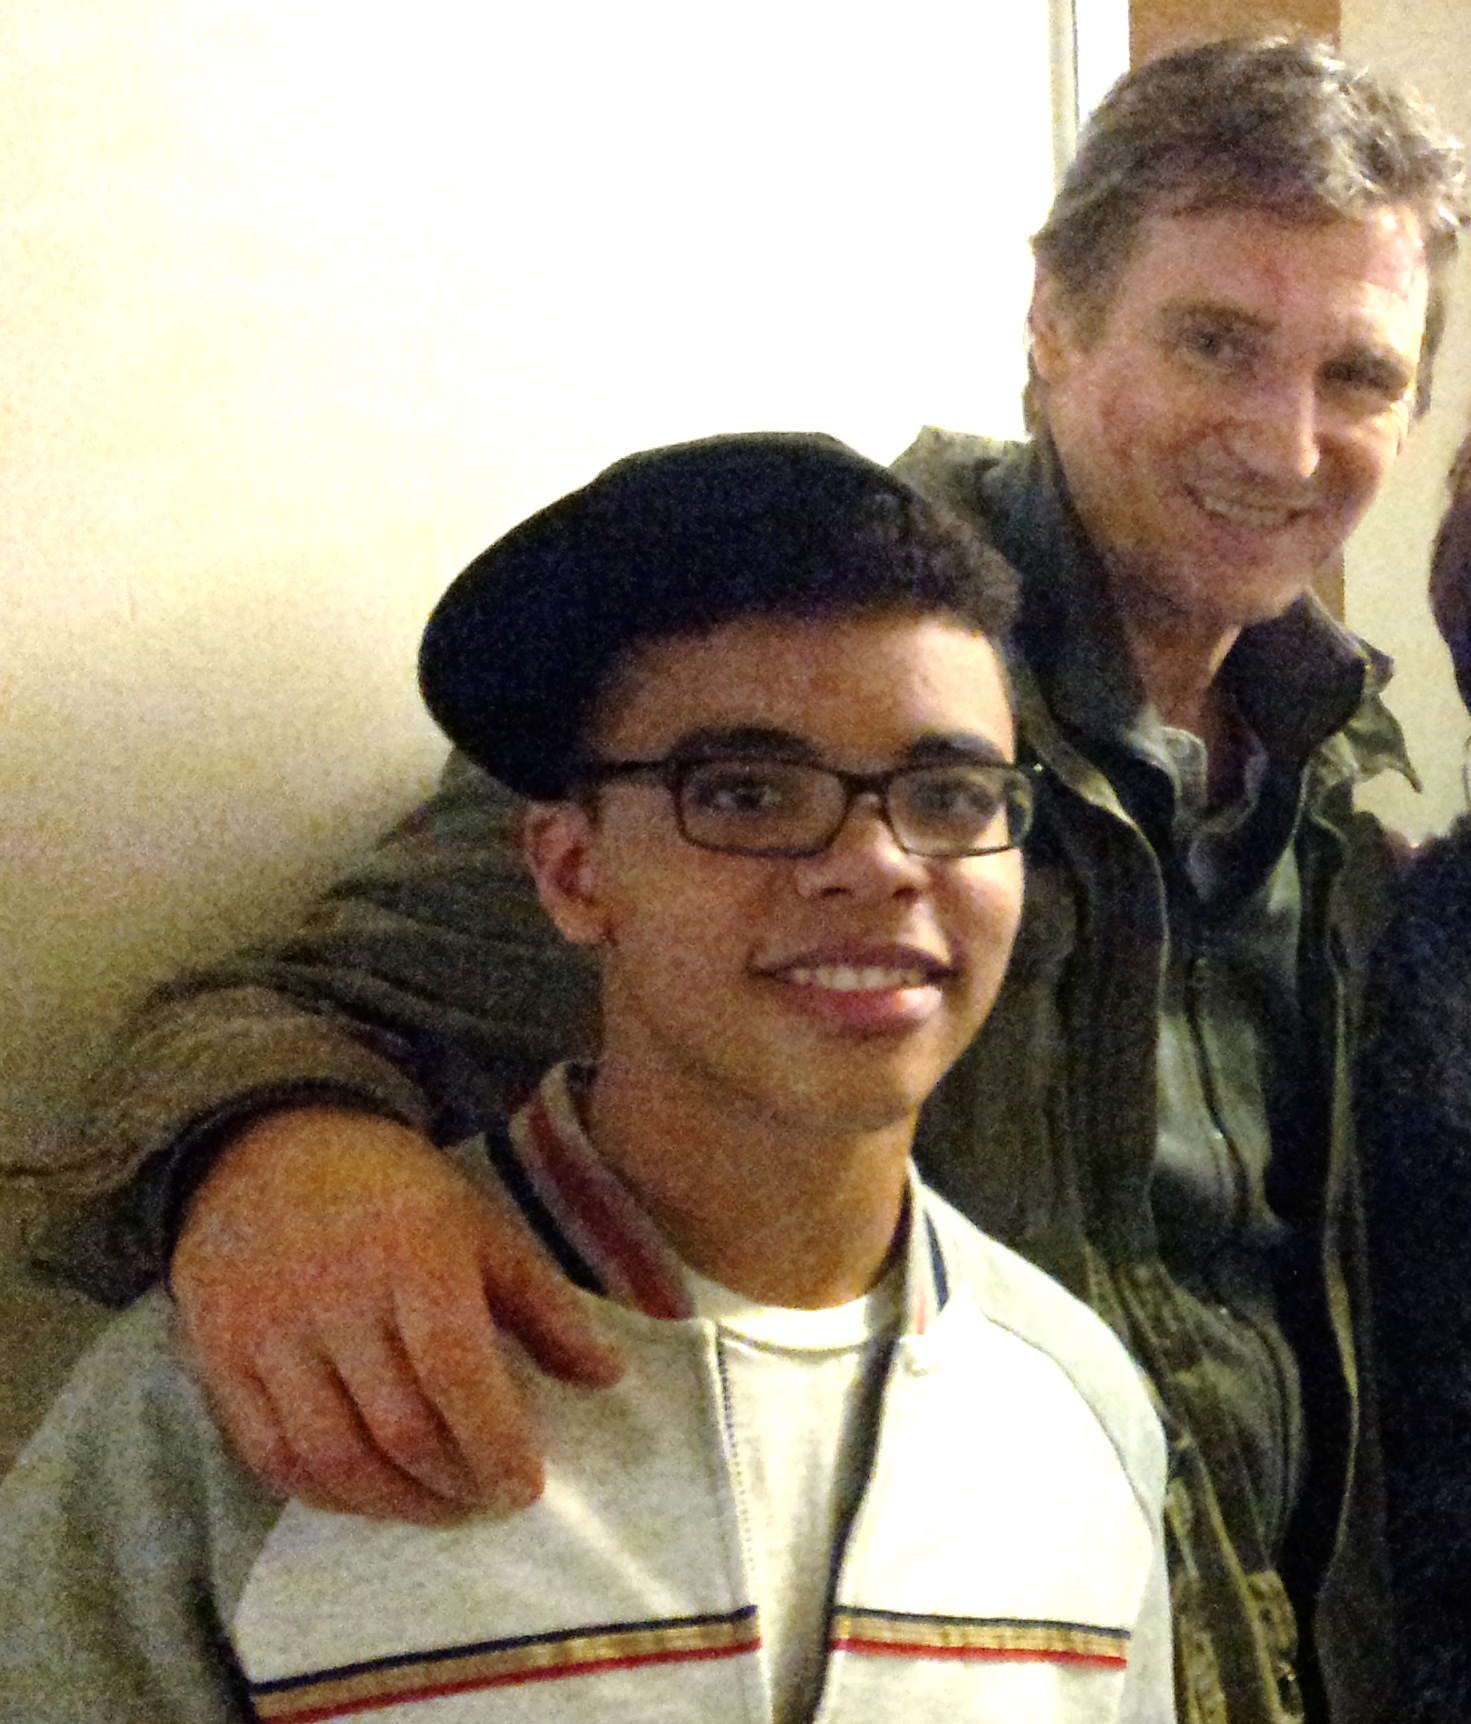 Devon with Liam Neeson after shooting wrapped for the night on the set of Run All Night.